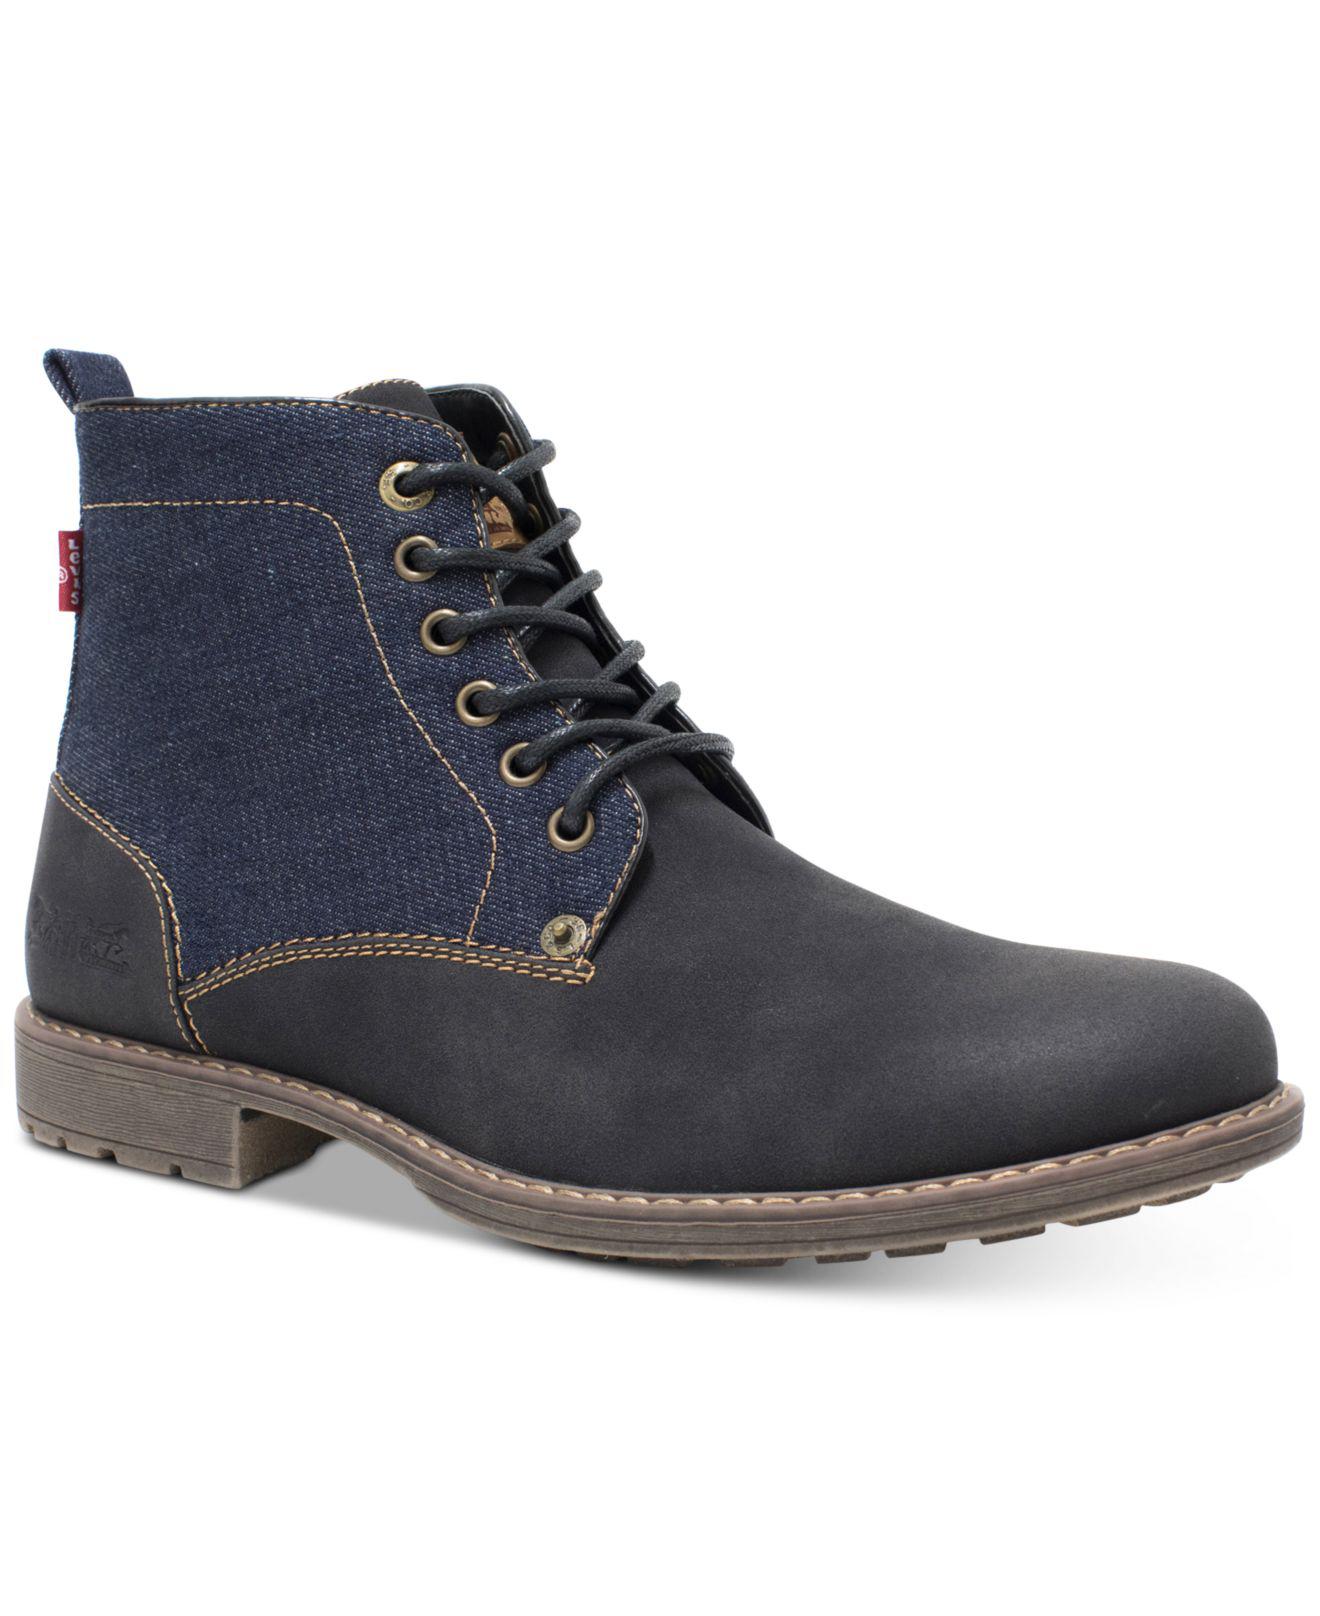 Grain Leather Outdoor Shoes | Steel Toe Cap Boots | Bacca Bucci